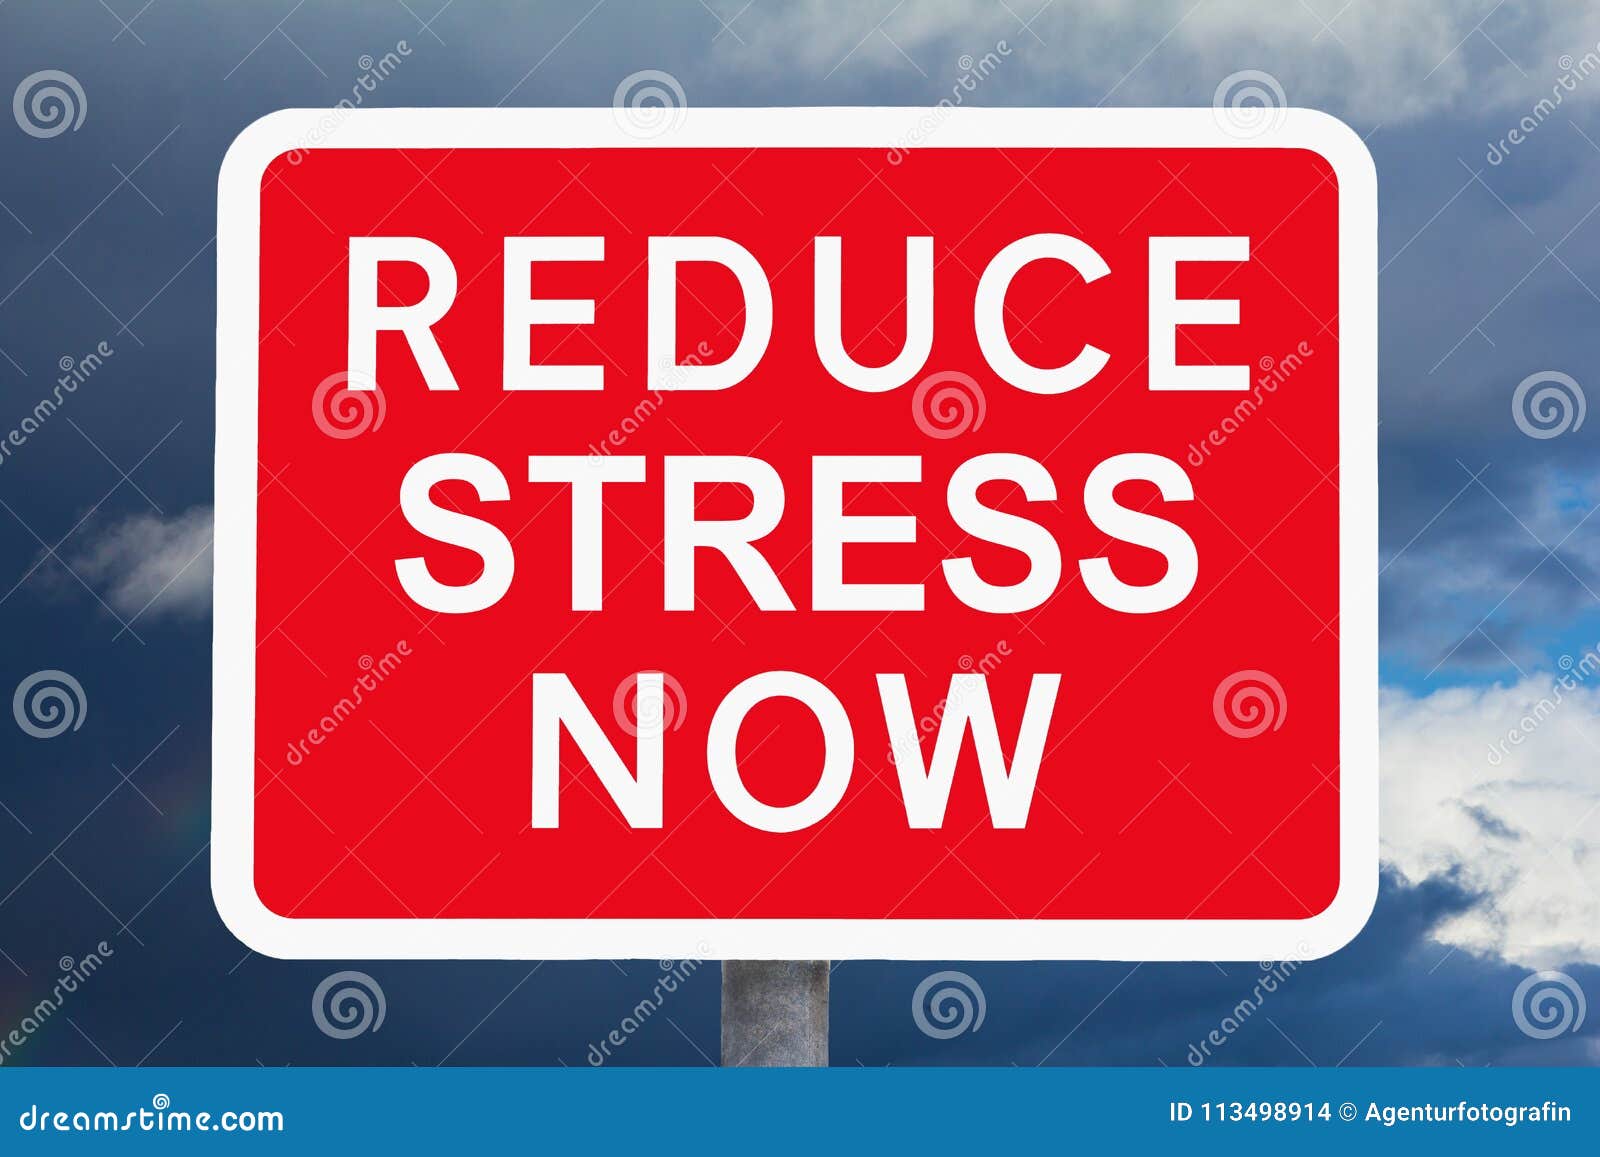 Warning Sign REDUCE STRESS NOW Stock Photo - Image of sign, traffic